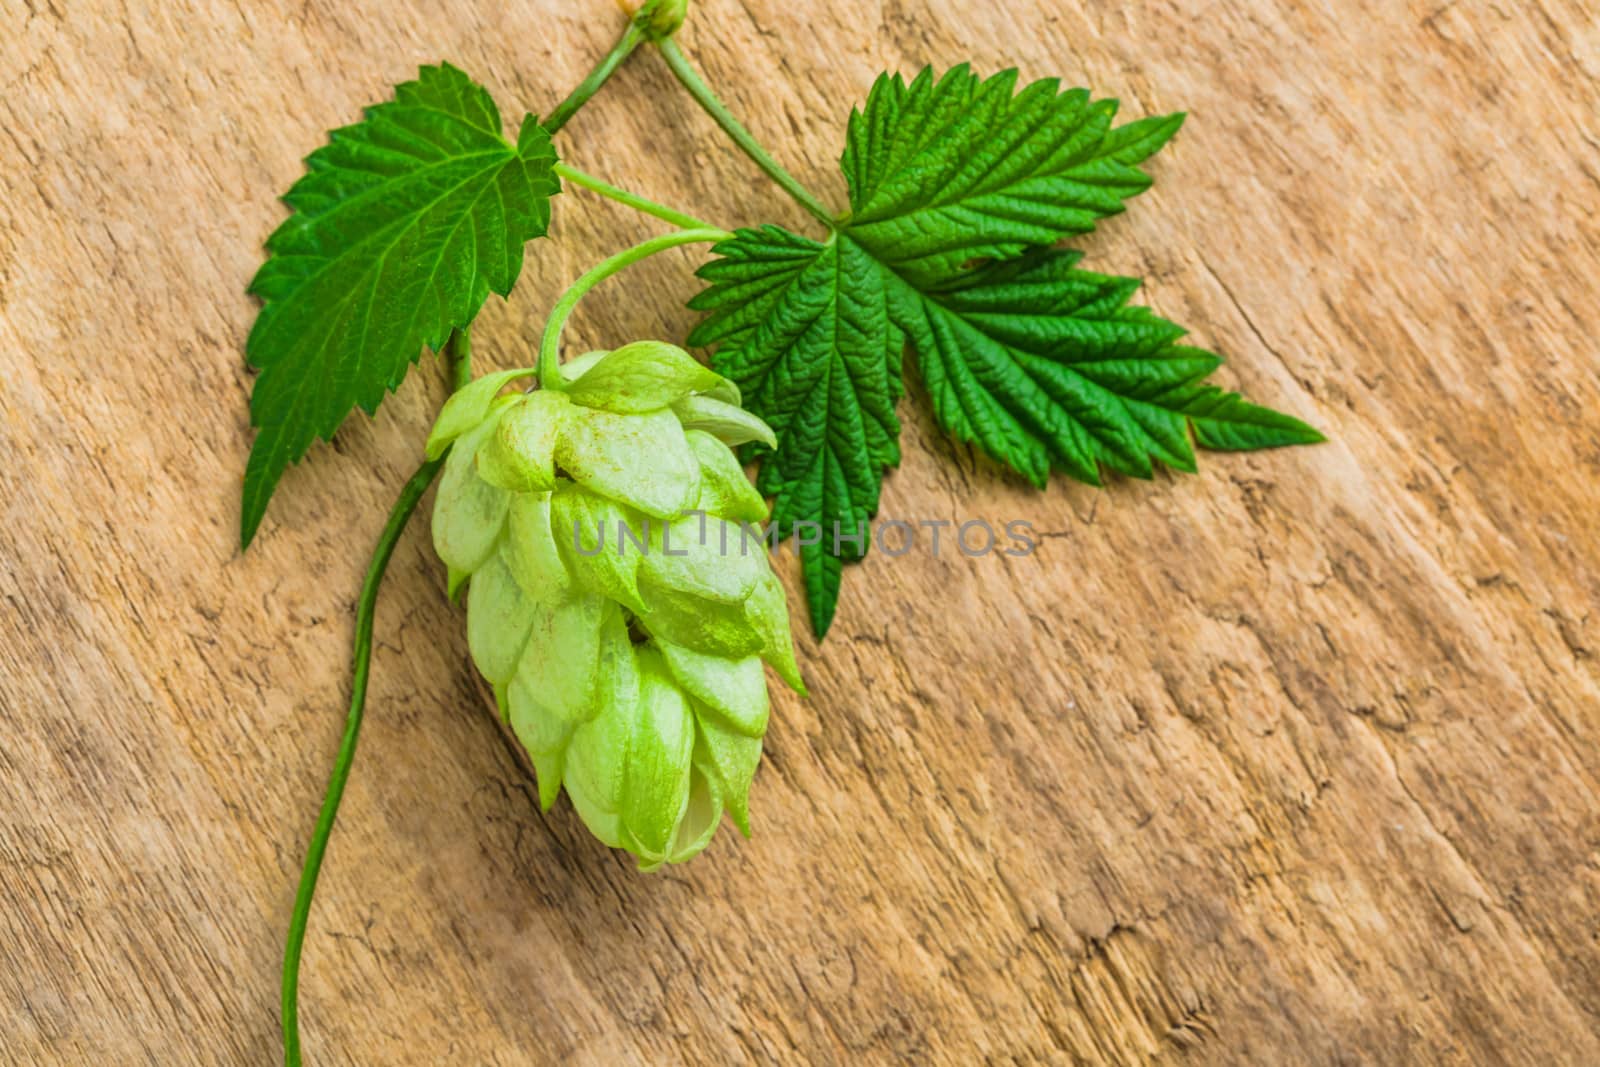 Hops for beer production in the background of the old board